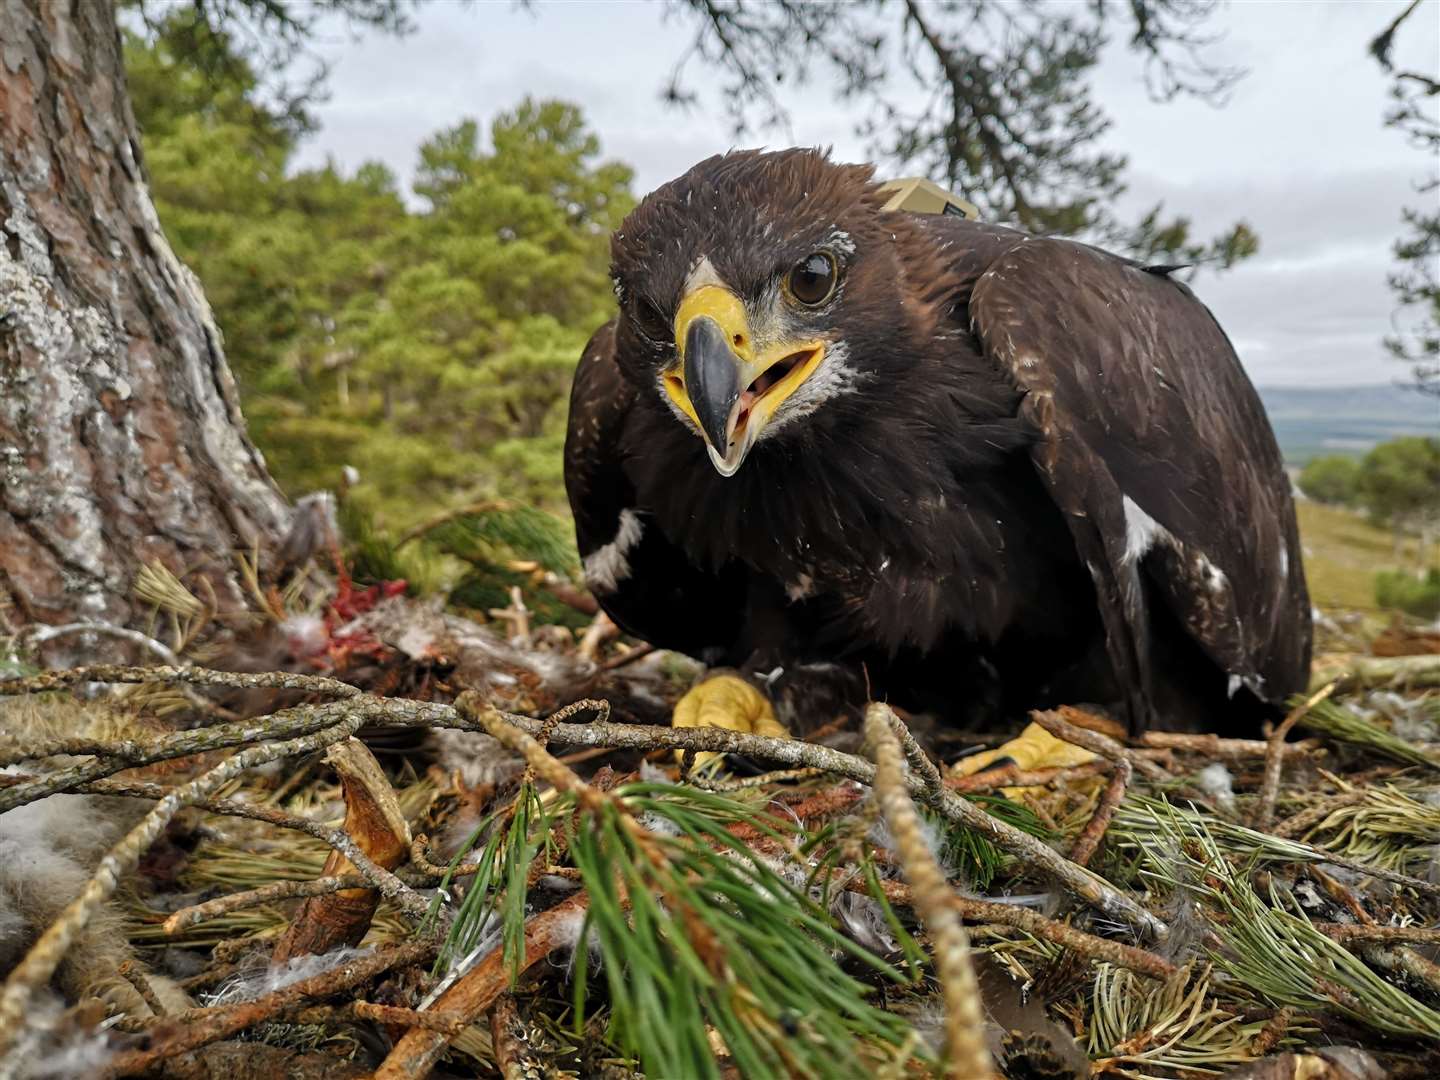 One of the golden eagle chicks that has been tagged as part of the project. Photo: Dr Ewan Weston.